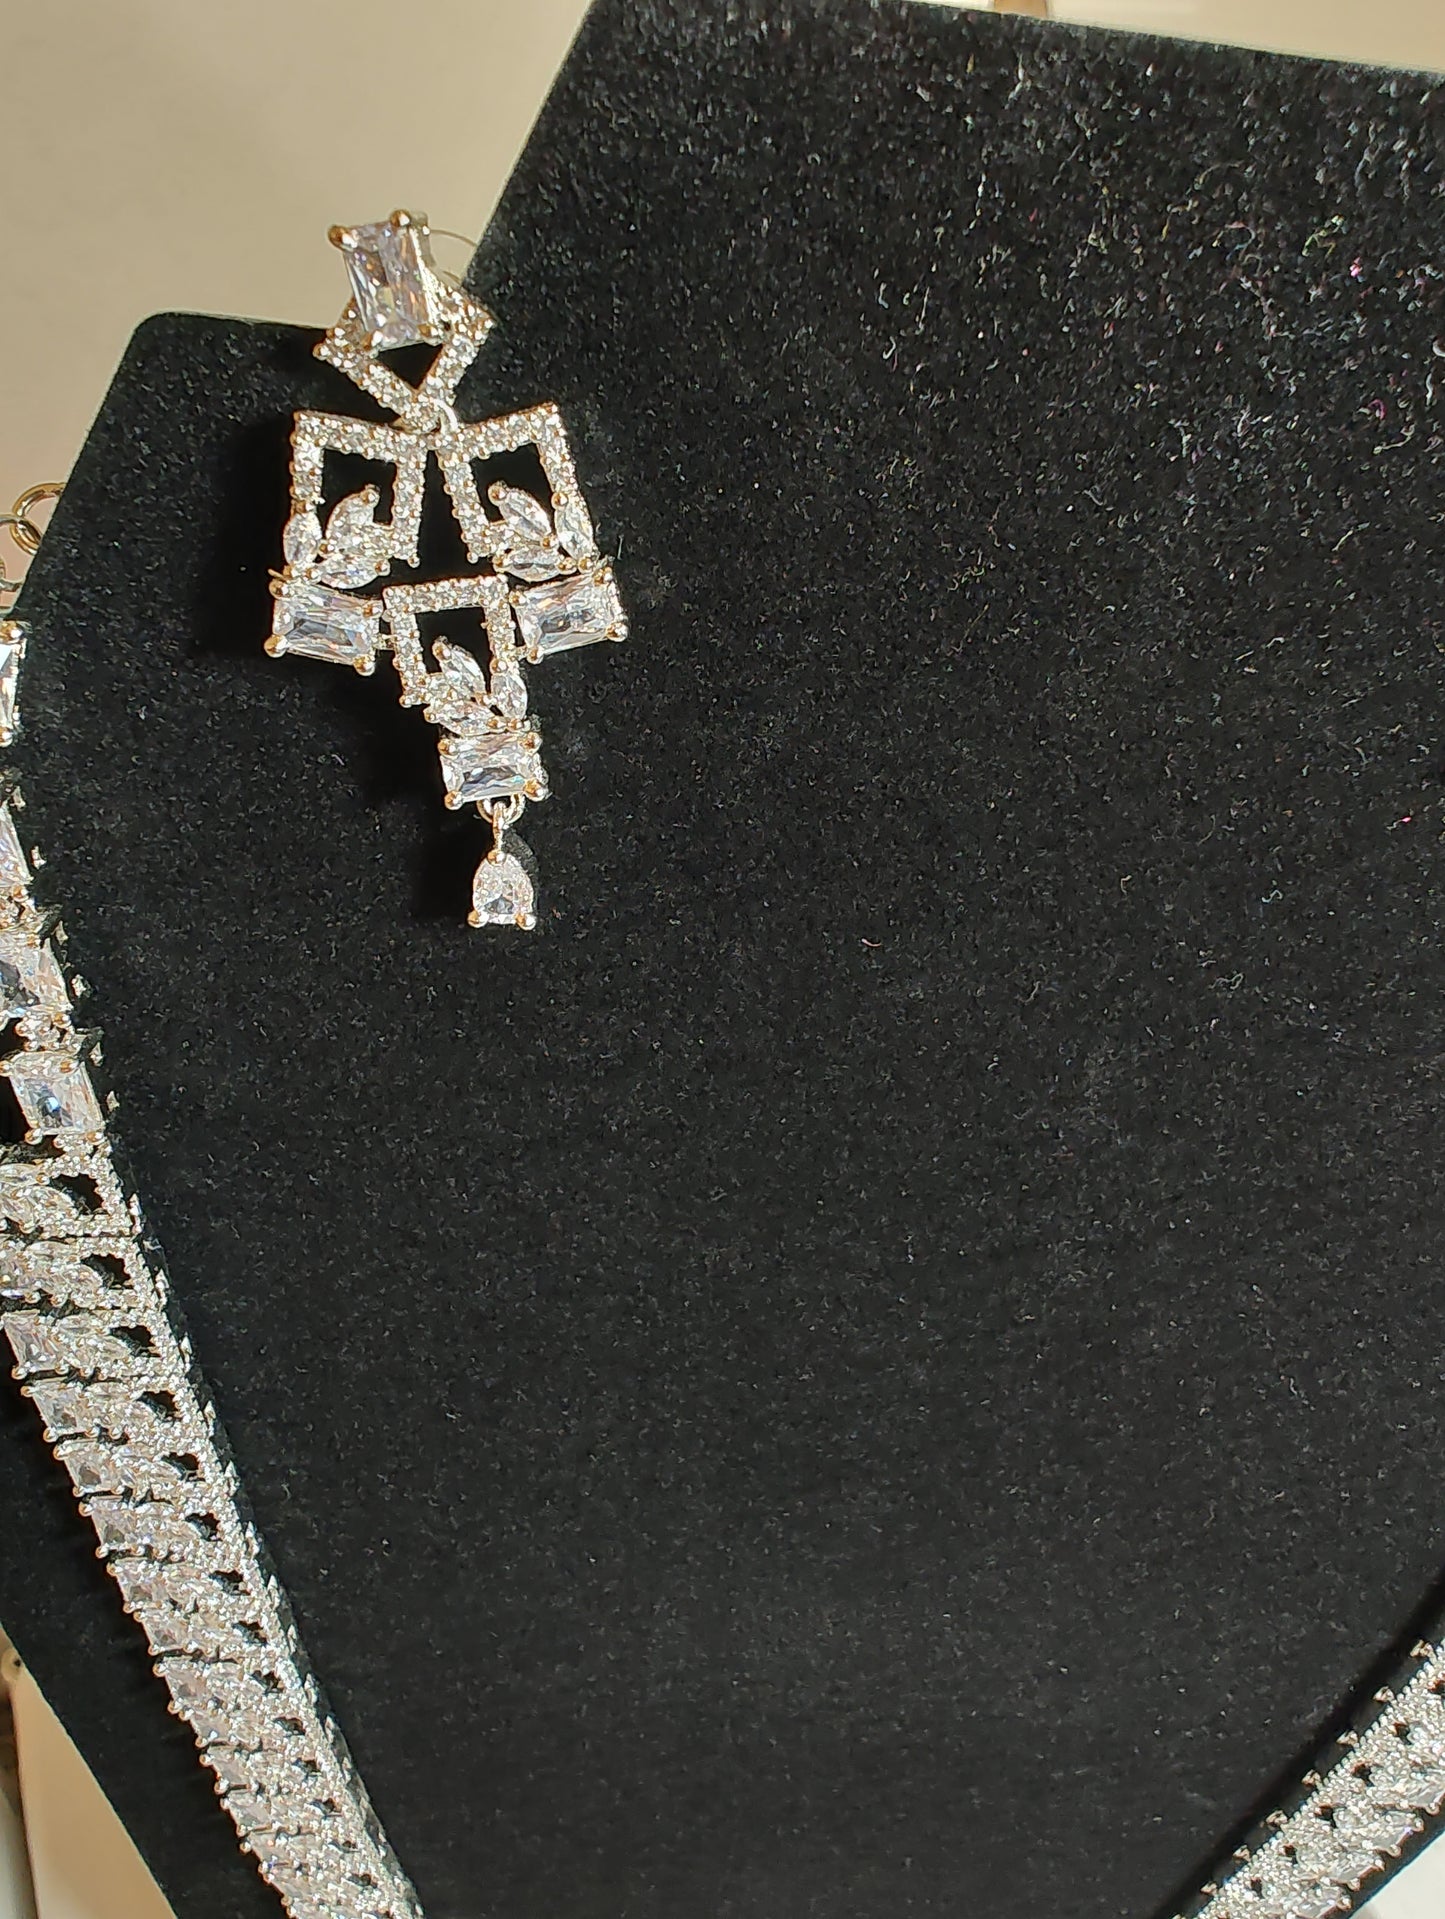 Beautiful Long Necklace Set With White CZ Stones In Tempe